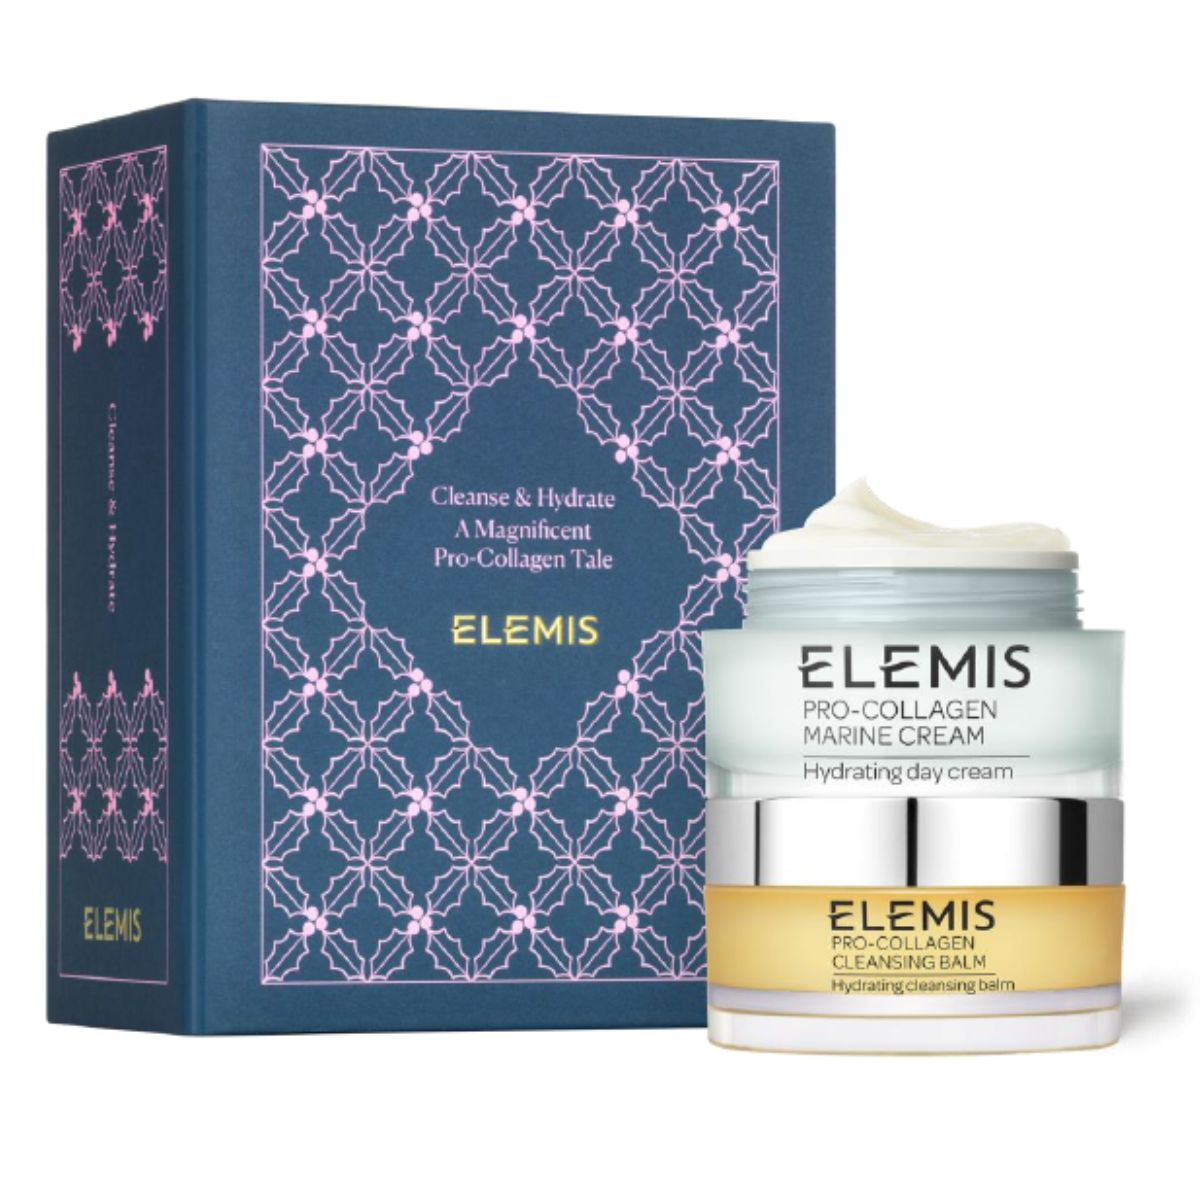 Elemis Cleanse & Hydrate A Magnificent Pro-Collagen Tale